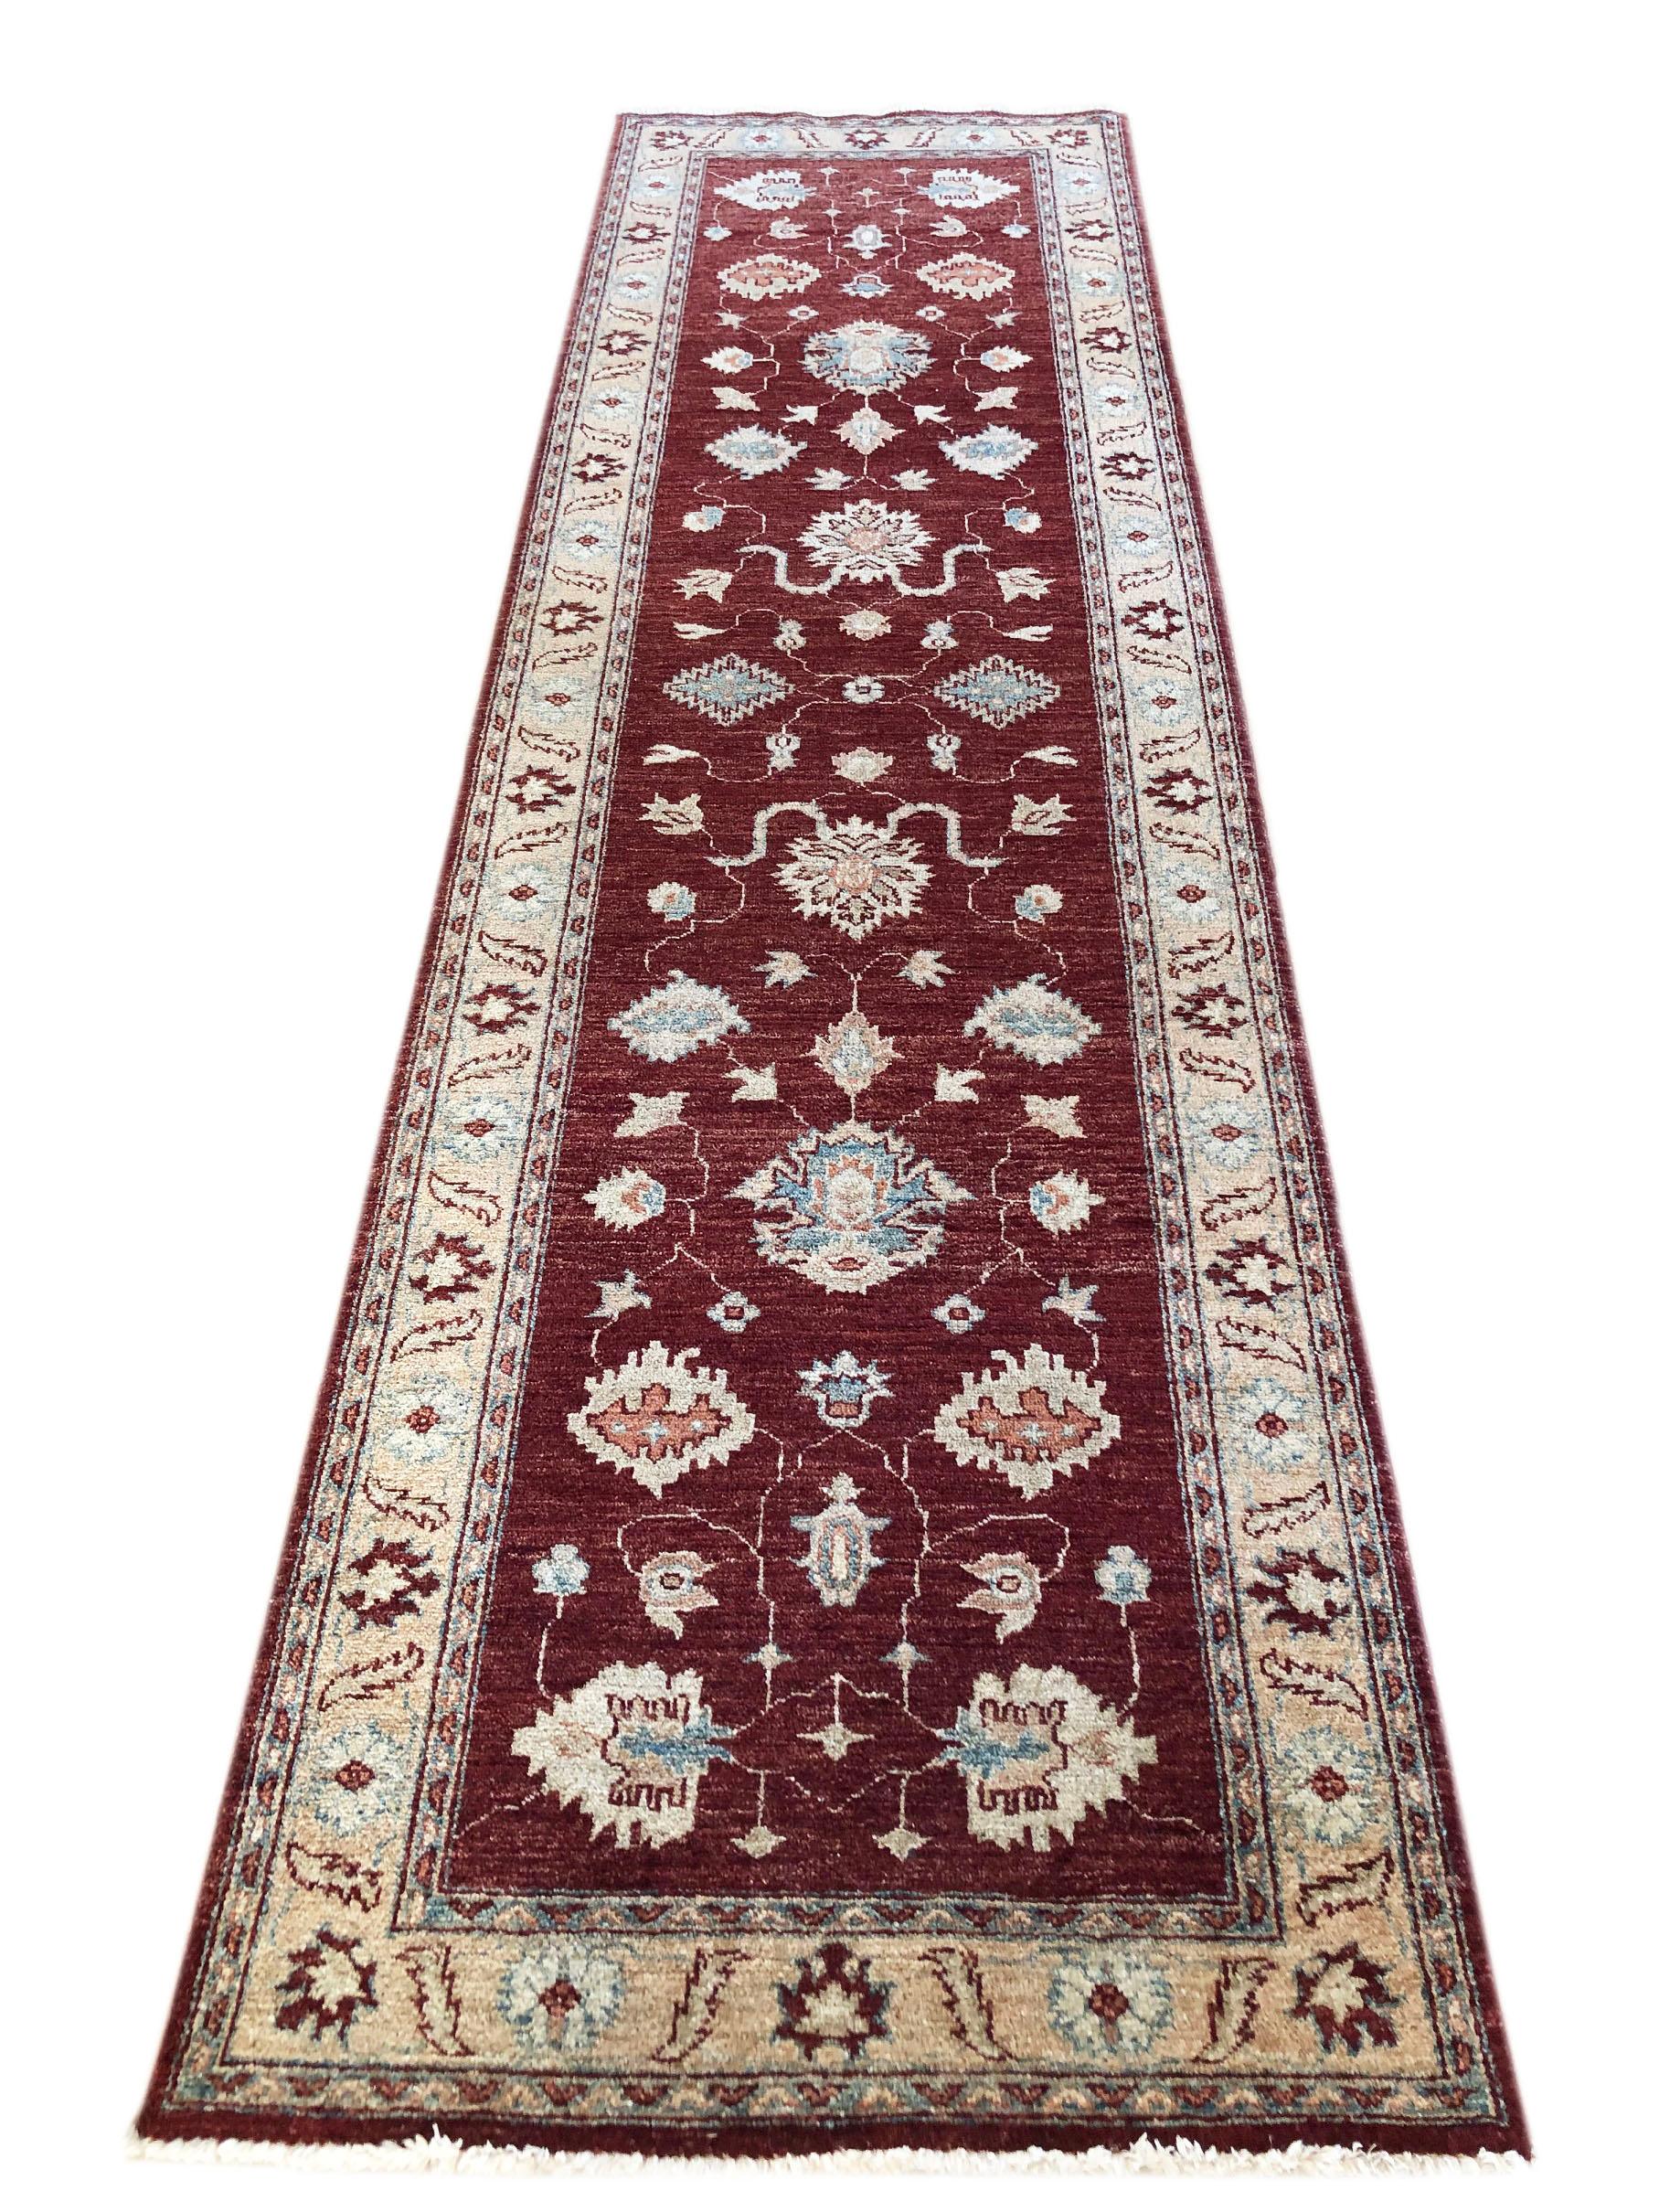 This Peshawar Pakistan rug is a fine knotted with a wool pile and cotton weft. The base color is burgundy and the border is cream. The Peshawar rugs are in high demand across the market because their design, quality and color combination. The size